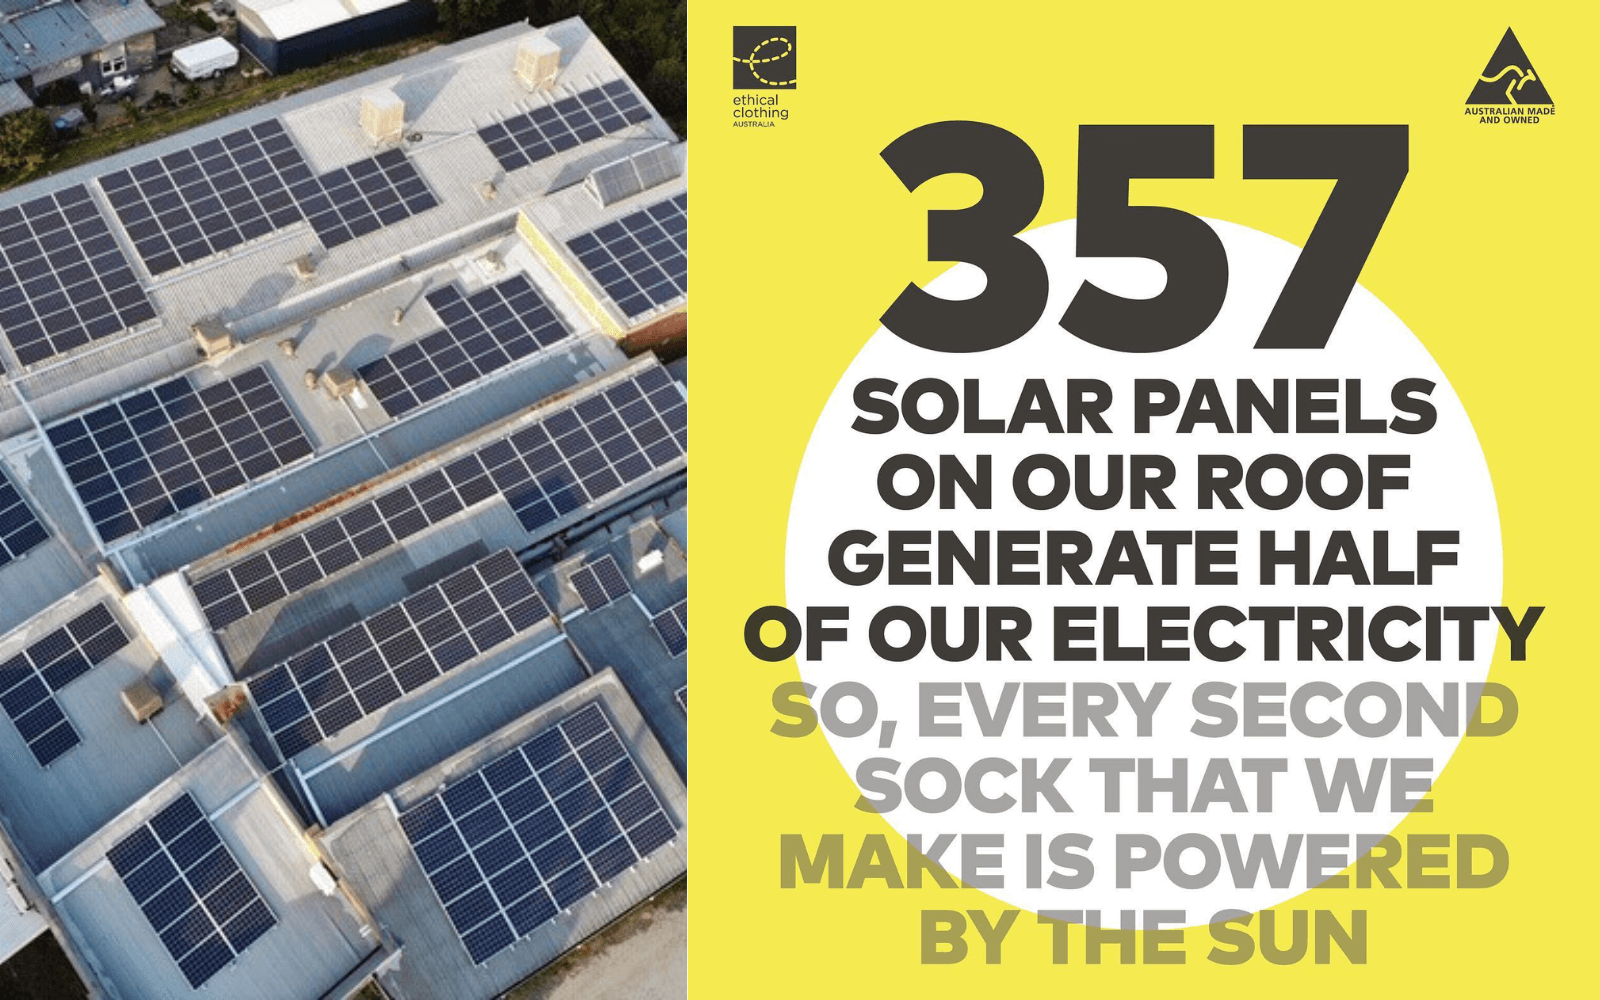 Promo image provided by Humphrey Law Australian Made socks. 357 Solar panels on our roof generate half of our electricity. So every second sock that we make is powered by the sun. Added beside that is a photo of the factory roof showing the solar panels.